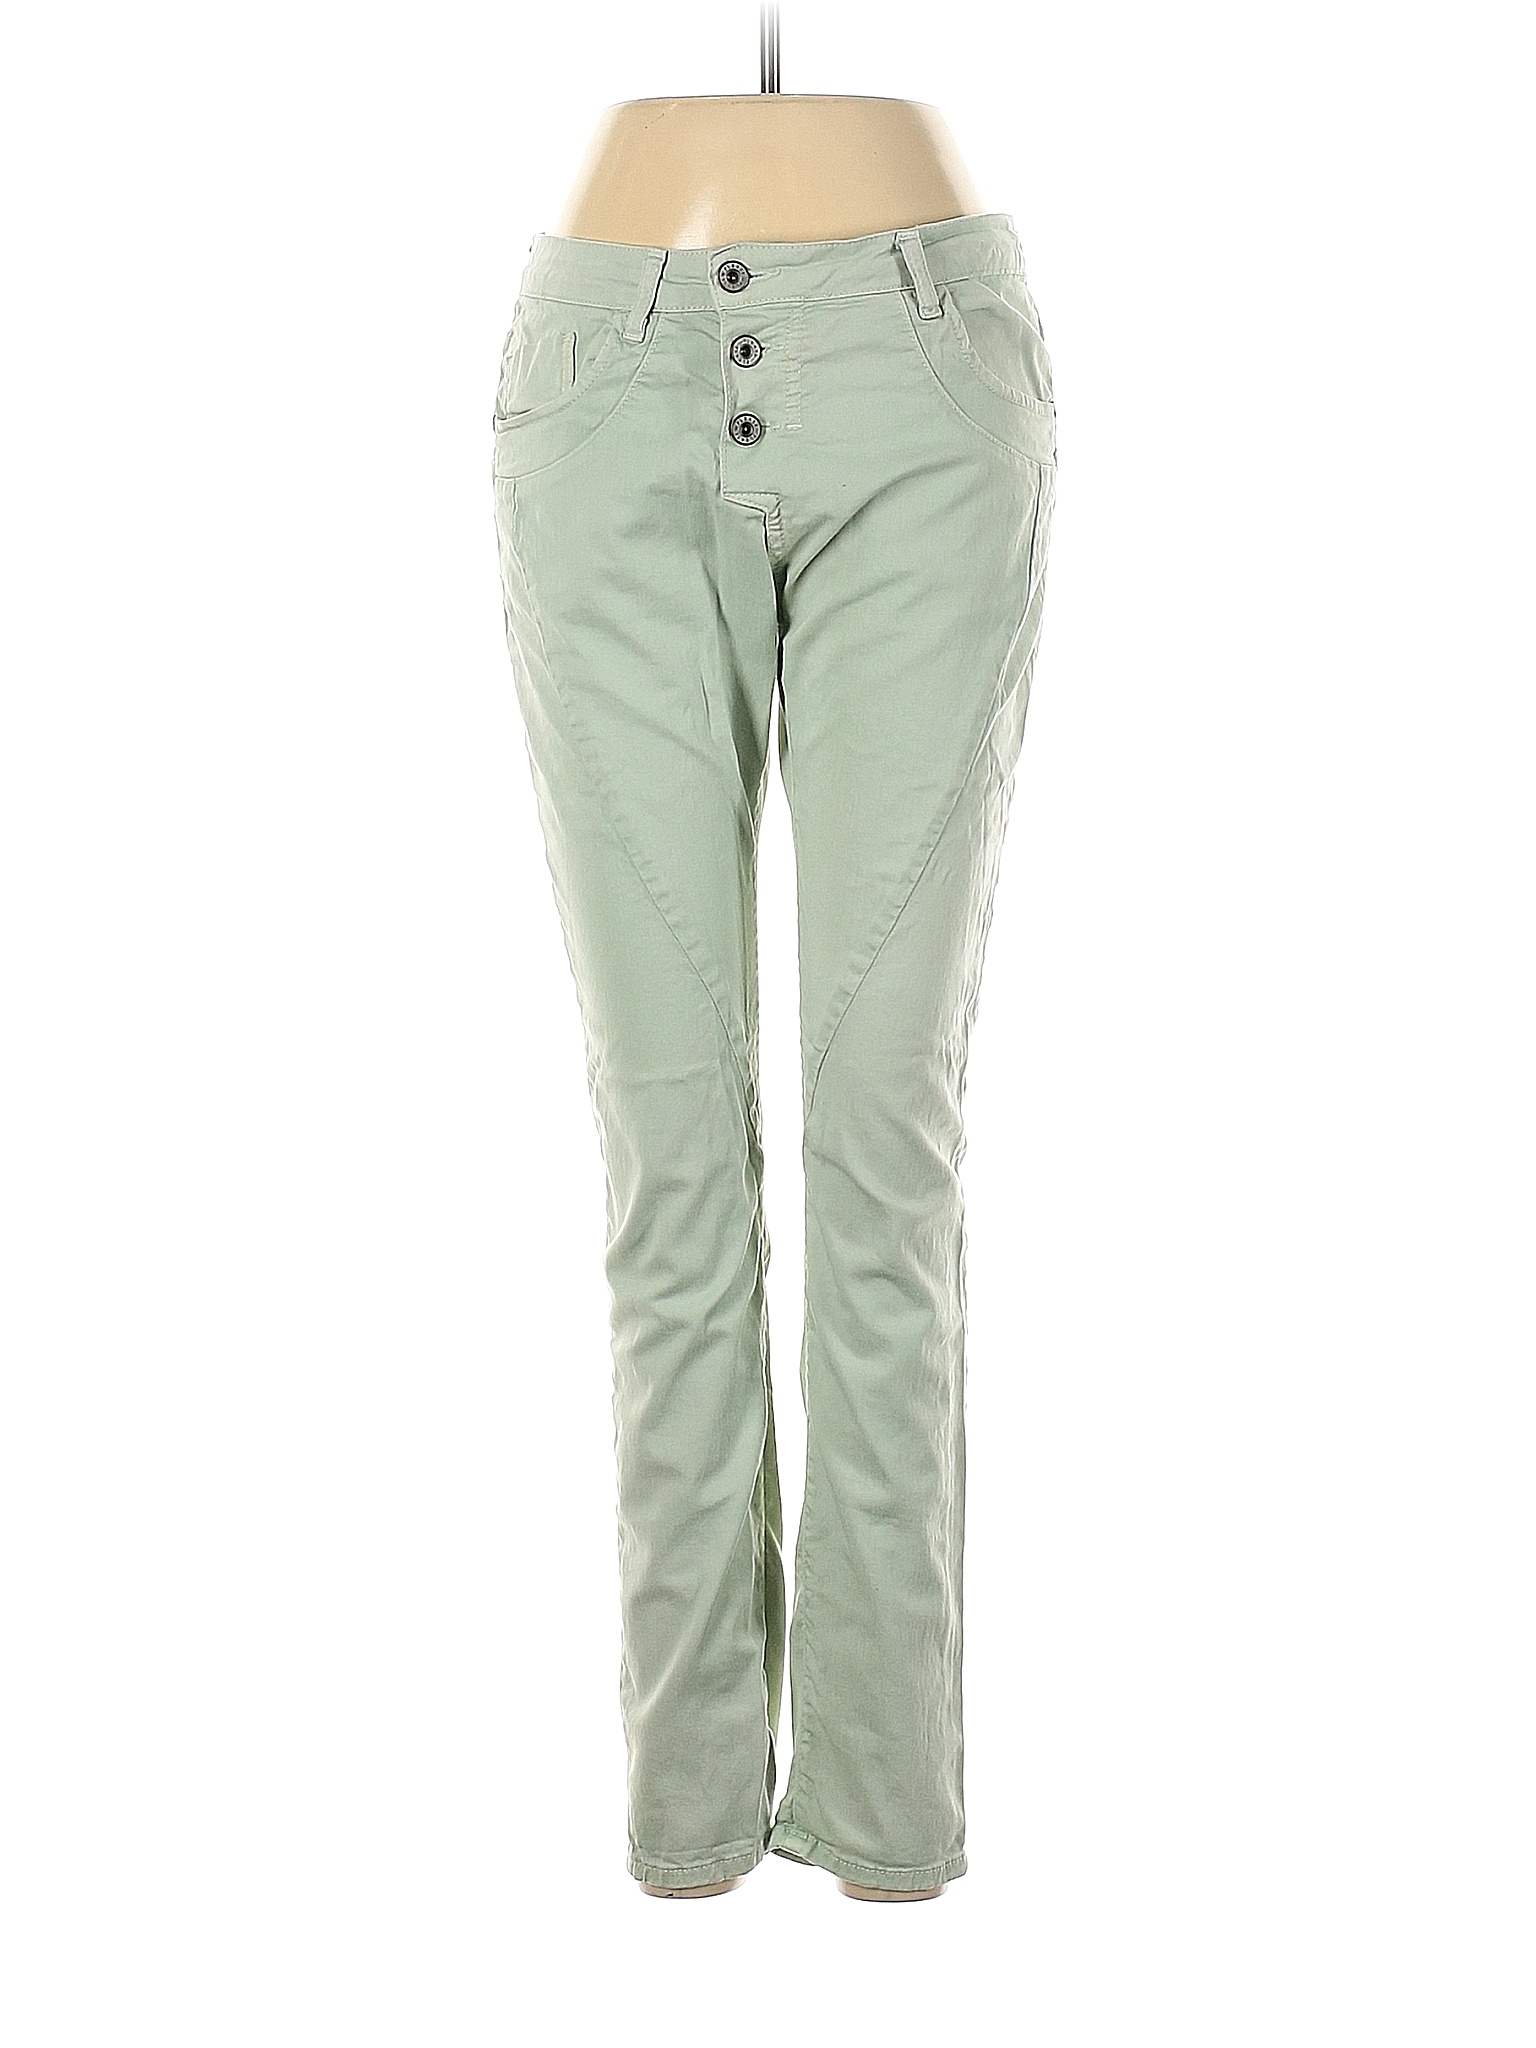 Please Solid - Green Size off Colored | S thredUP 92% Jeans